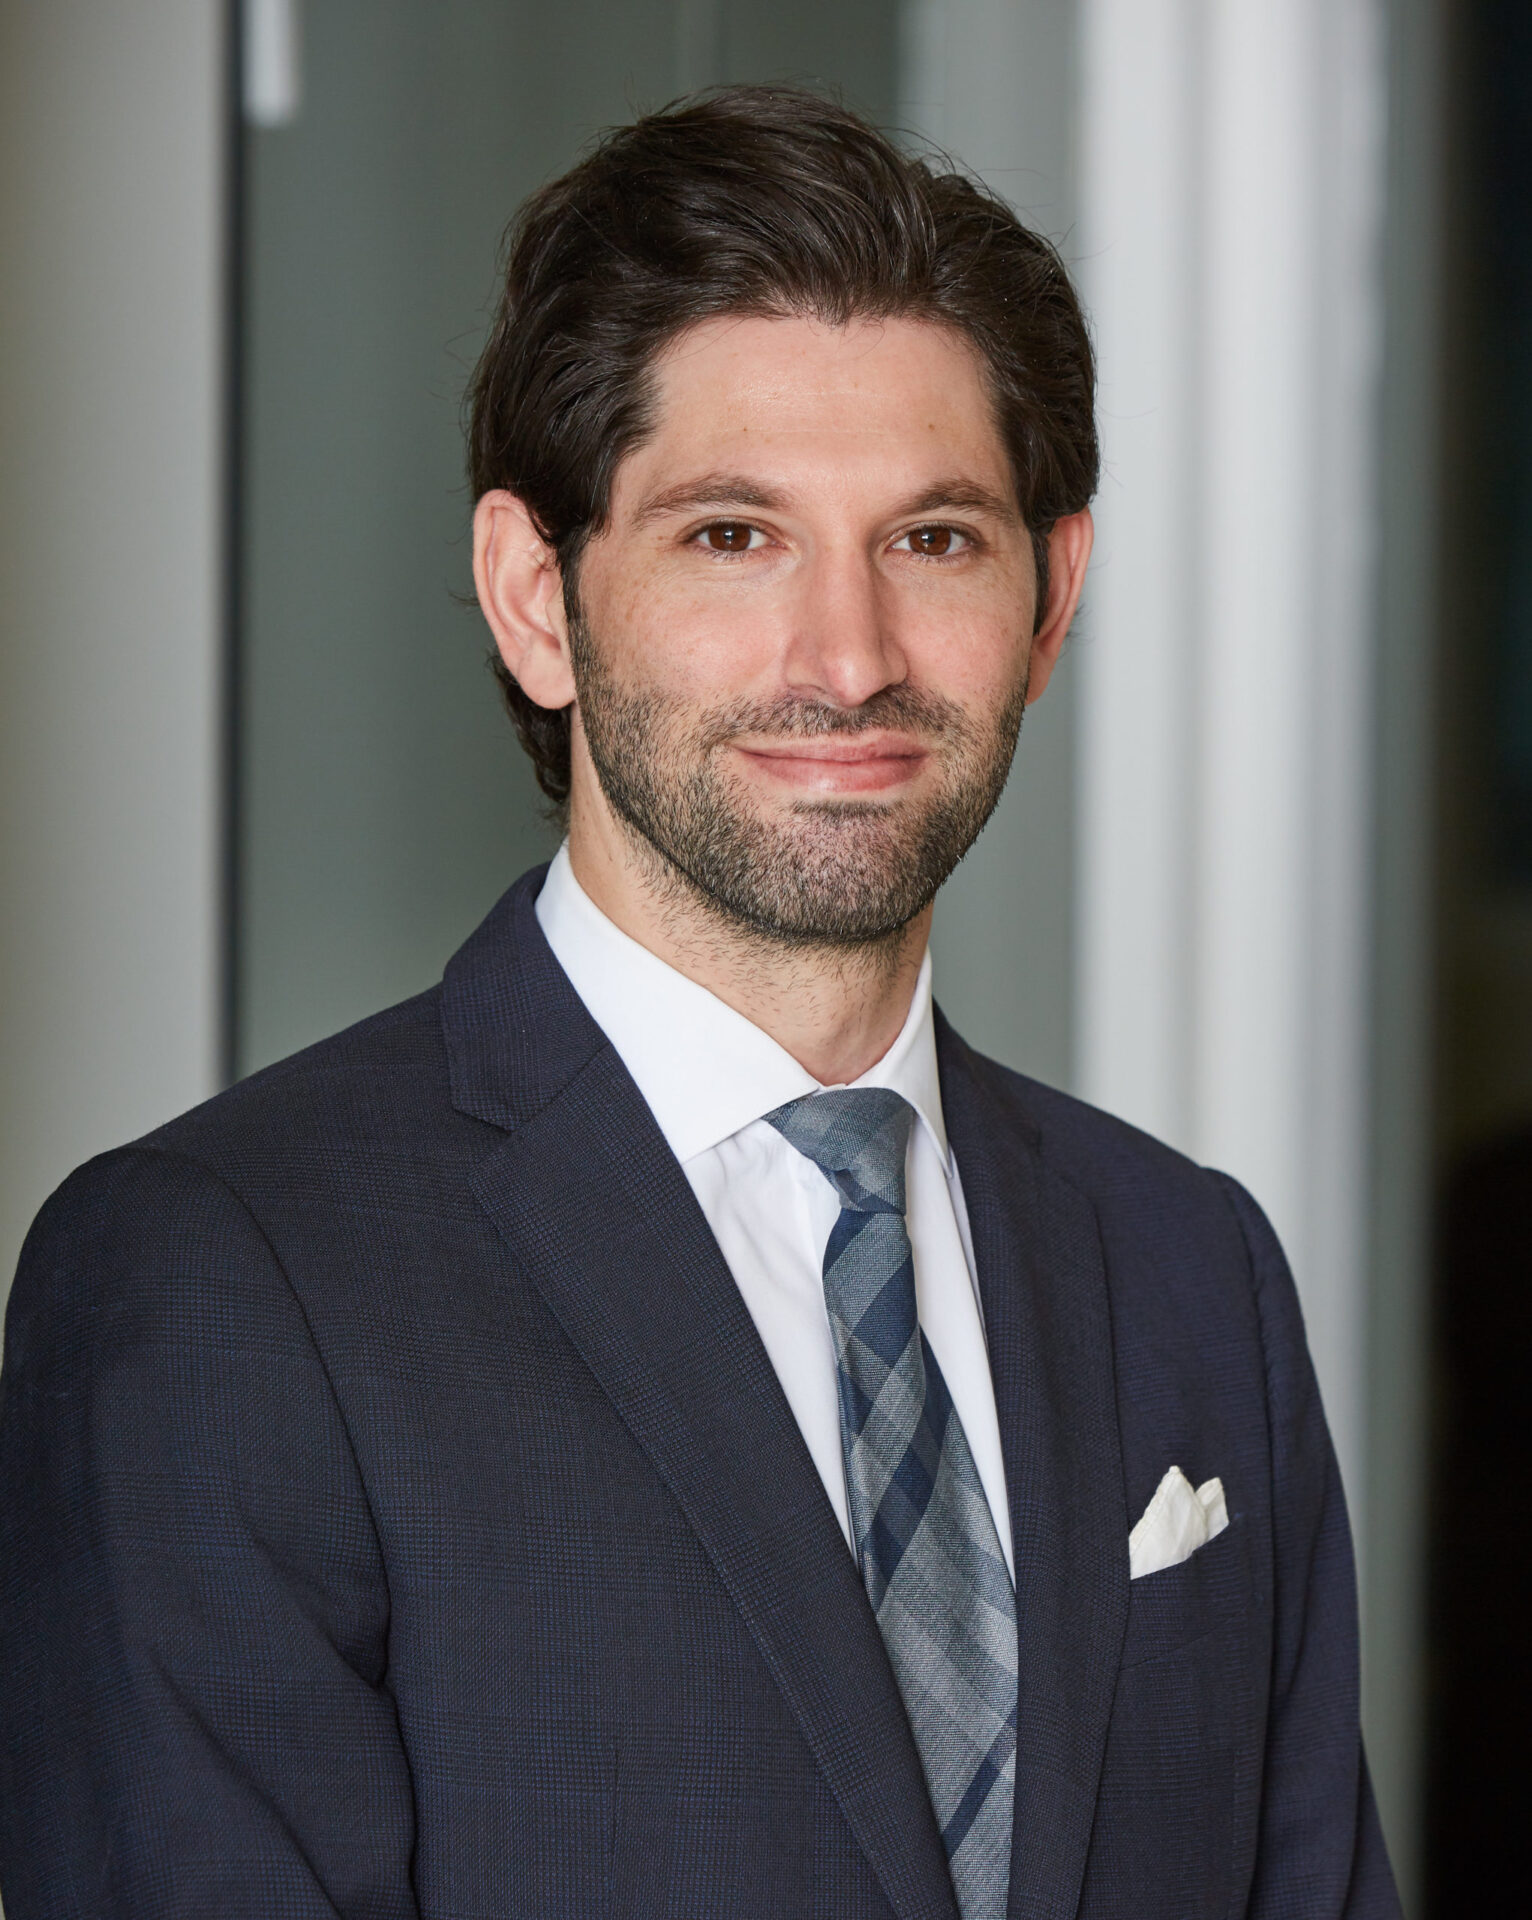 Cory D. Lapin - Personal Injury Lawyer in Miami, FL